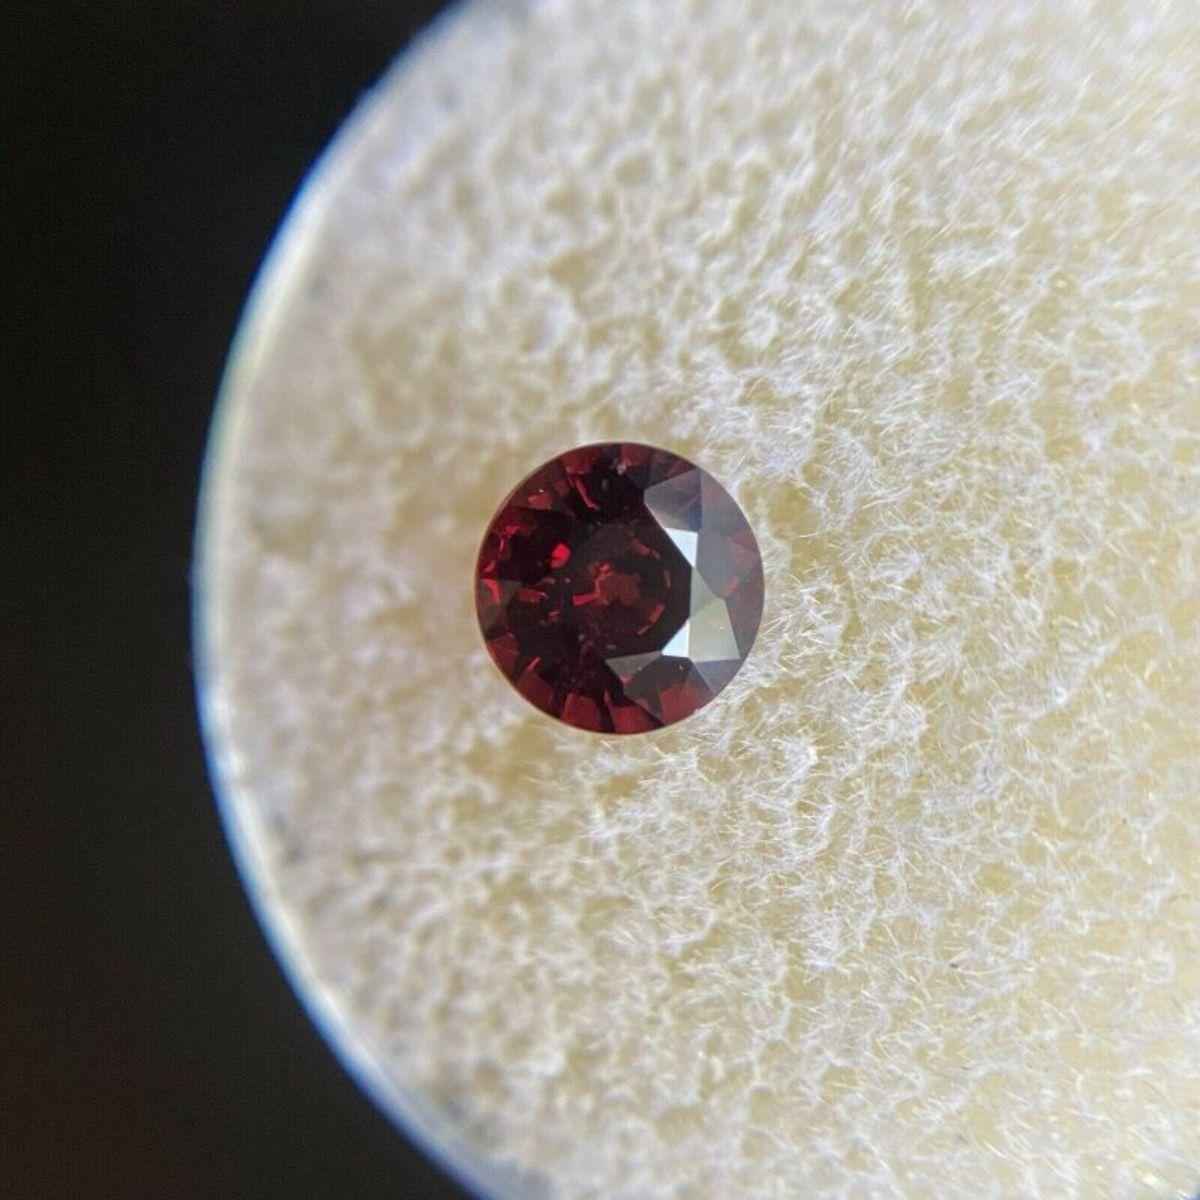 Fine 1.15ct Vivid Red Spessartine Garnet Round Diamond Cut Loose Gem 5.8mm

Fine Natural Spessartine Garnet Loose Gemstone. 
1.15 Carat with a beautiful vivid orange red colour and good clarity. Clean stone with only small natural inclusions visible